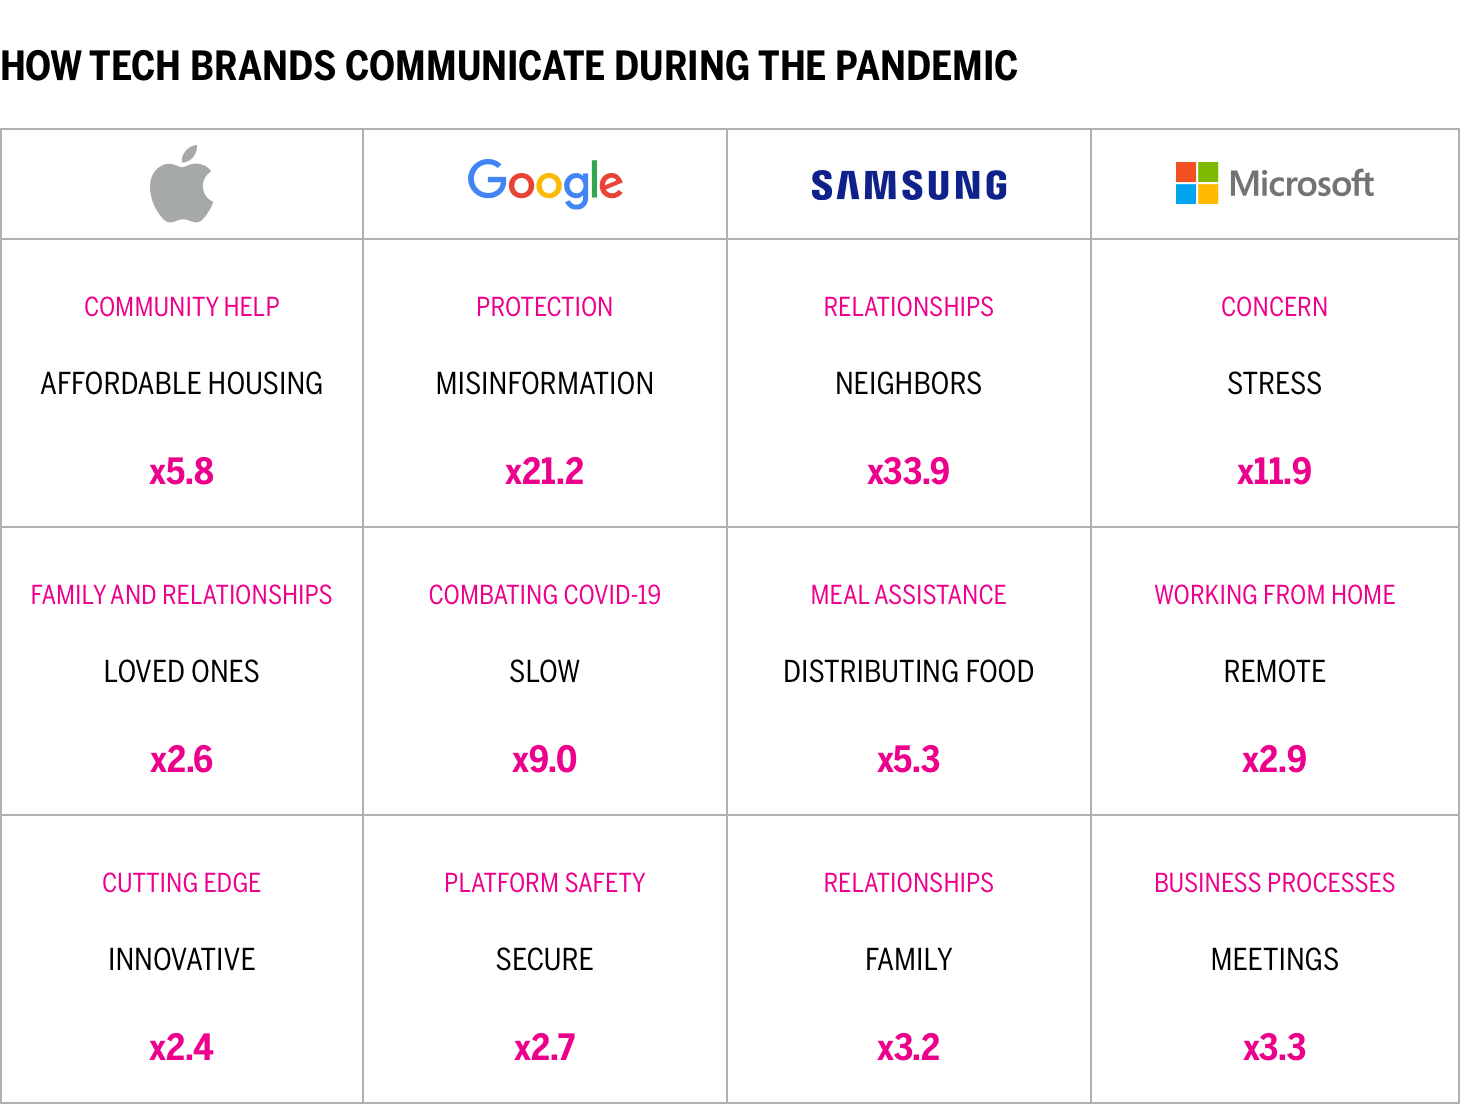 How tech brands communicate during the pandemic chart